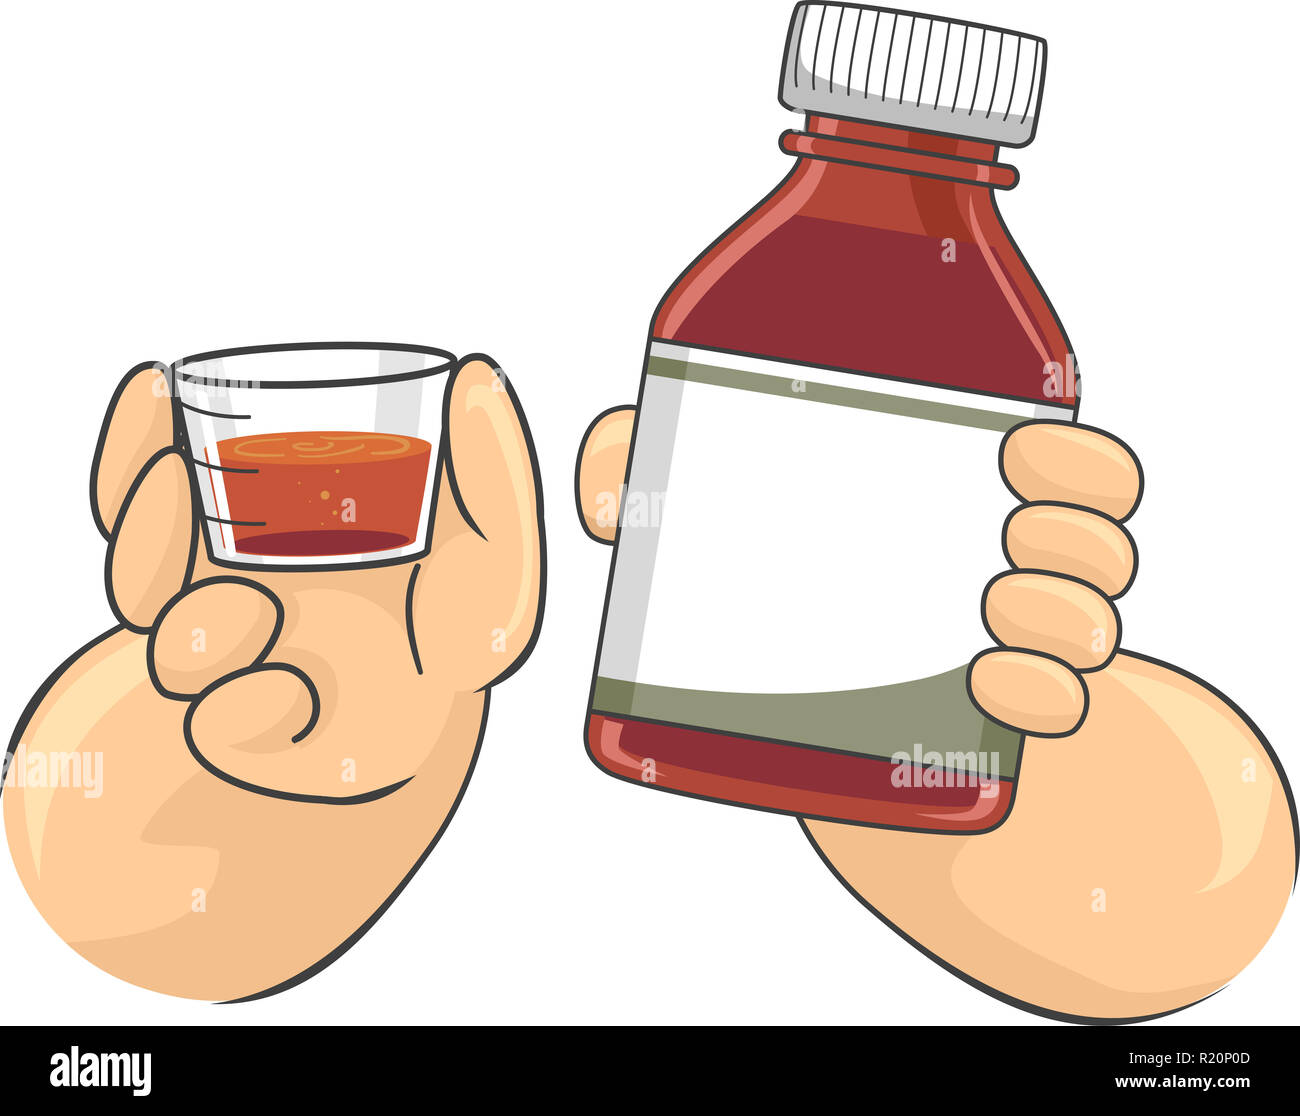 Illustration Featuring a Little Kid Holding a Medicine Bottle in One Hand and a Measuring Cup in the Other Stock Photo